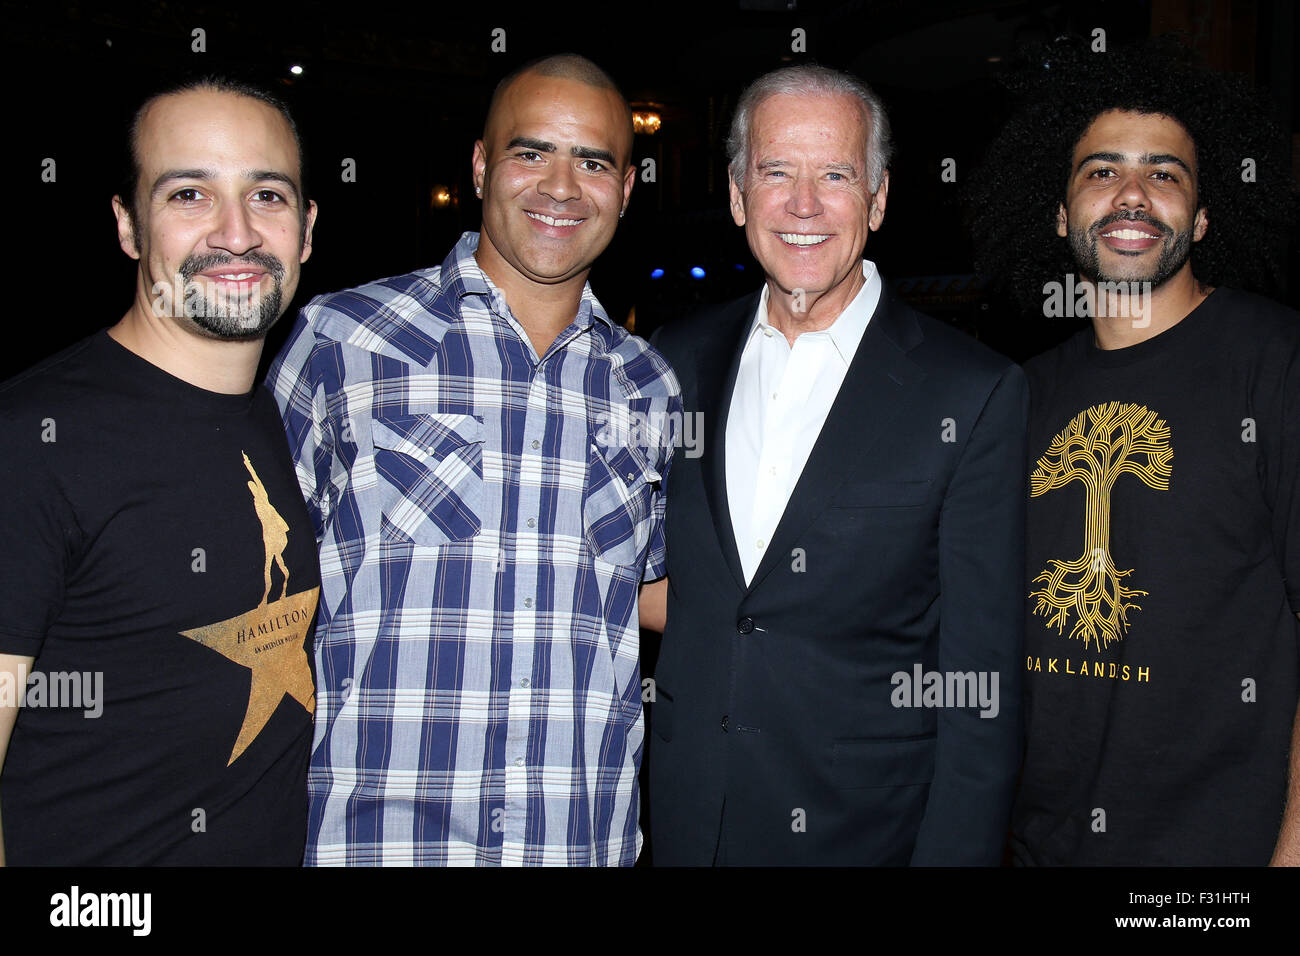 Vice President of the United States Joe Biden visits the cast of the  Broadway musical Hamilton at the Richard Rodgers Theatre. Featuring:  Lin-Manuel Miranda, Christopher Jackson, Joe Biden, Daveed Diggs Where: New